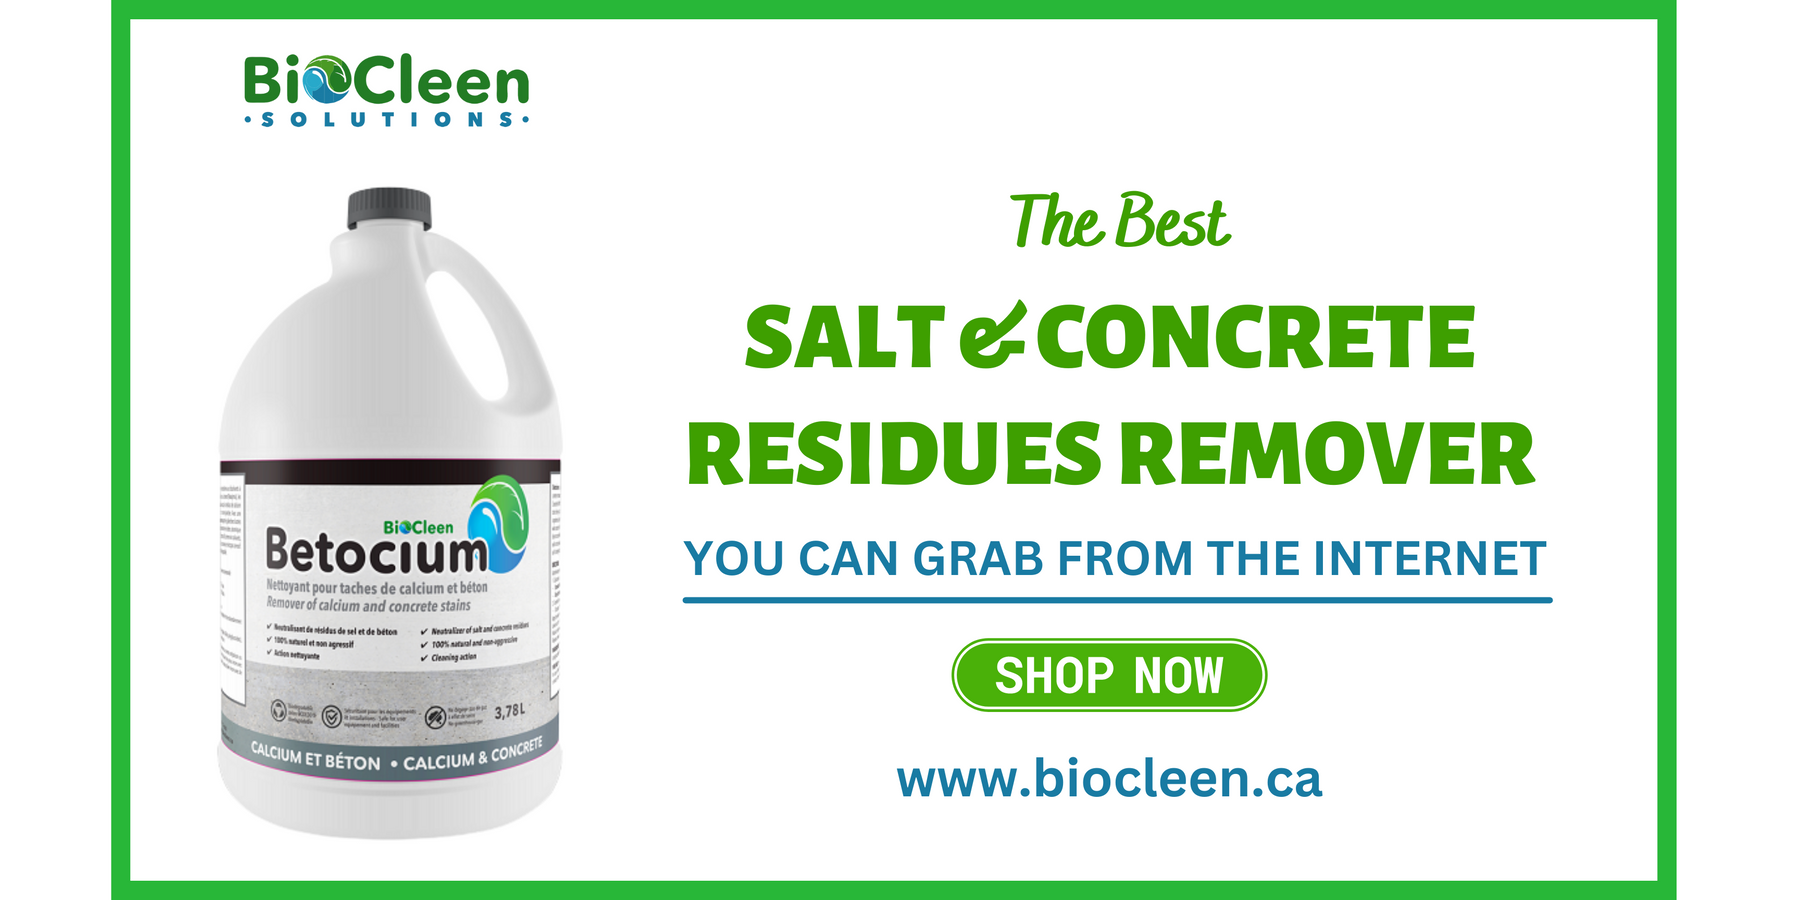 Best Salt and Concrete Residues Remover you can grab from the internet